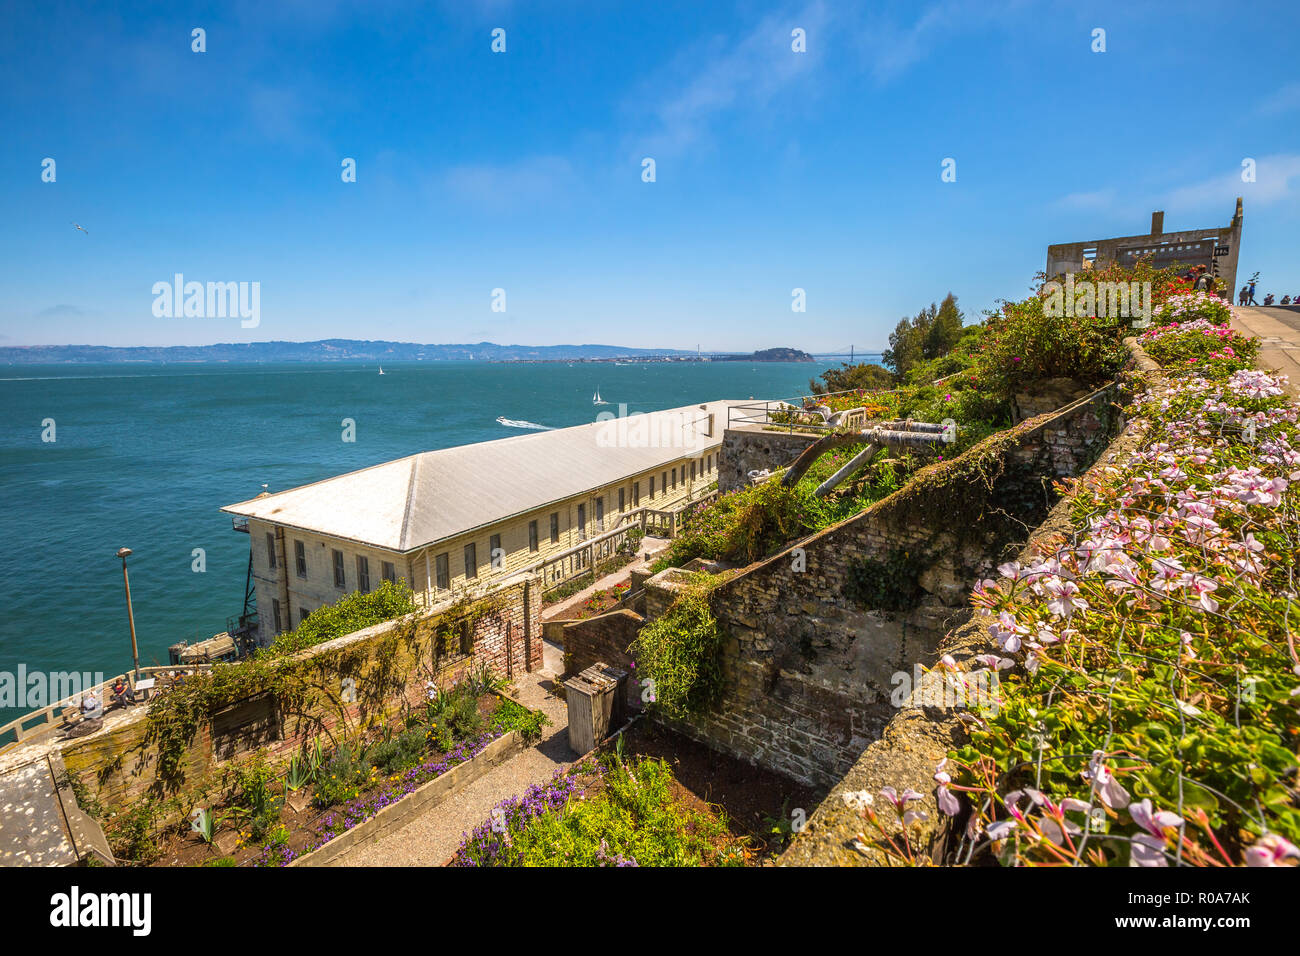 San Francisco, California, United States - August 14, 2016: aerial view of prison garden in Alcatraz prison for inmates recreation and open air work.  Stock Photo